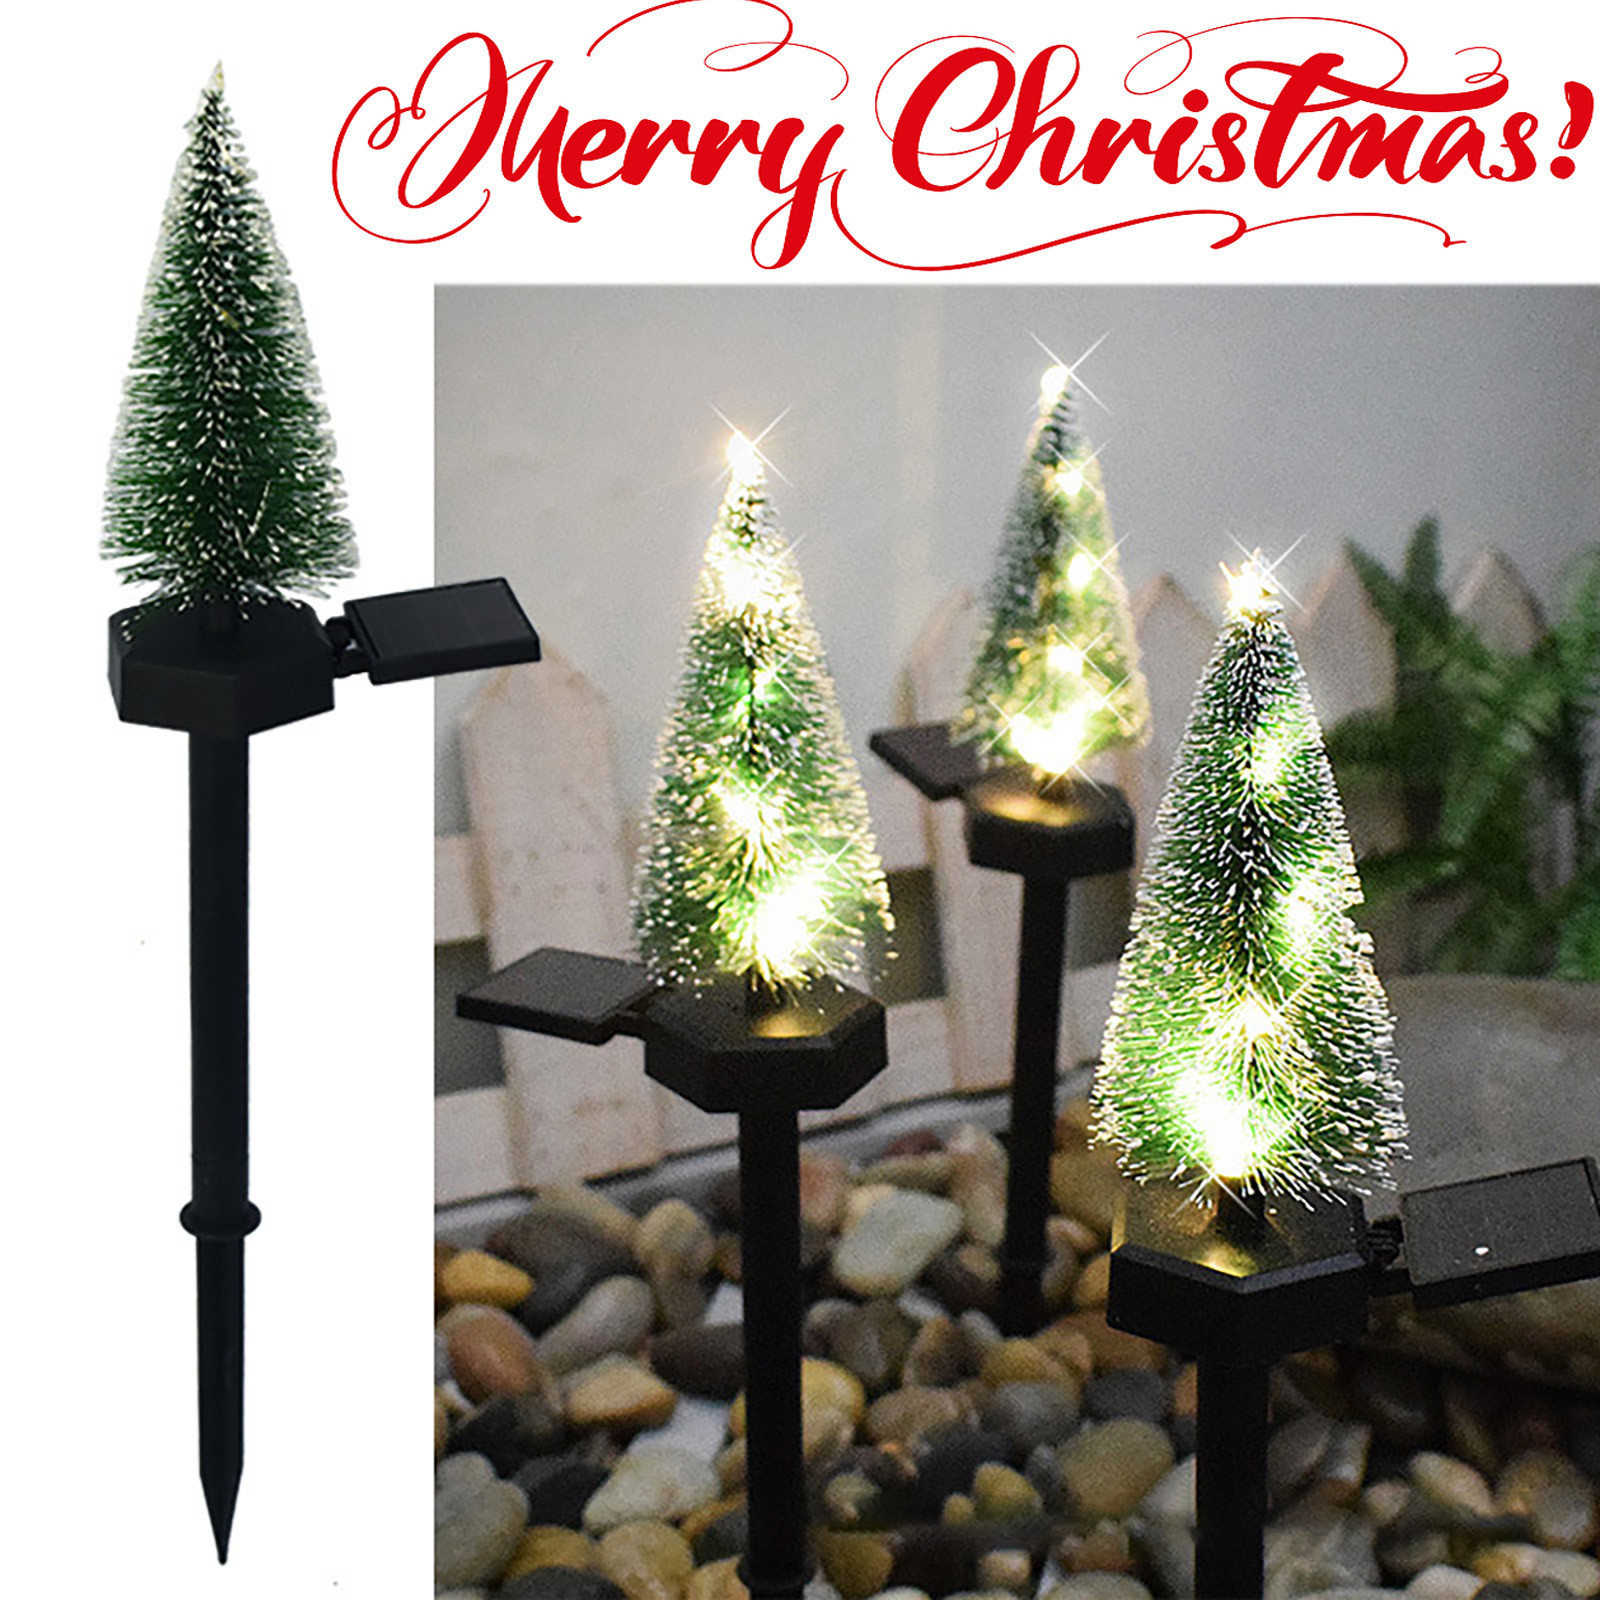 Christmas-Tree-Lights-Led-Solar-Light-For-Garden-Decoration-Lawn-Lamp-Outdoor-Home-Pathway-Bulb-Wate-1918433-1